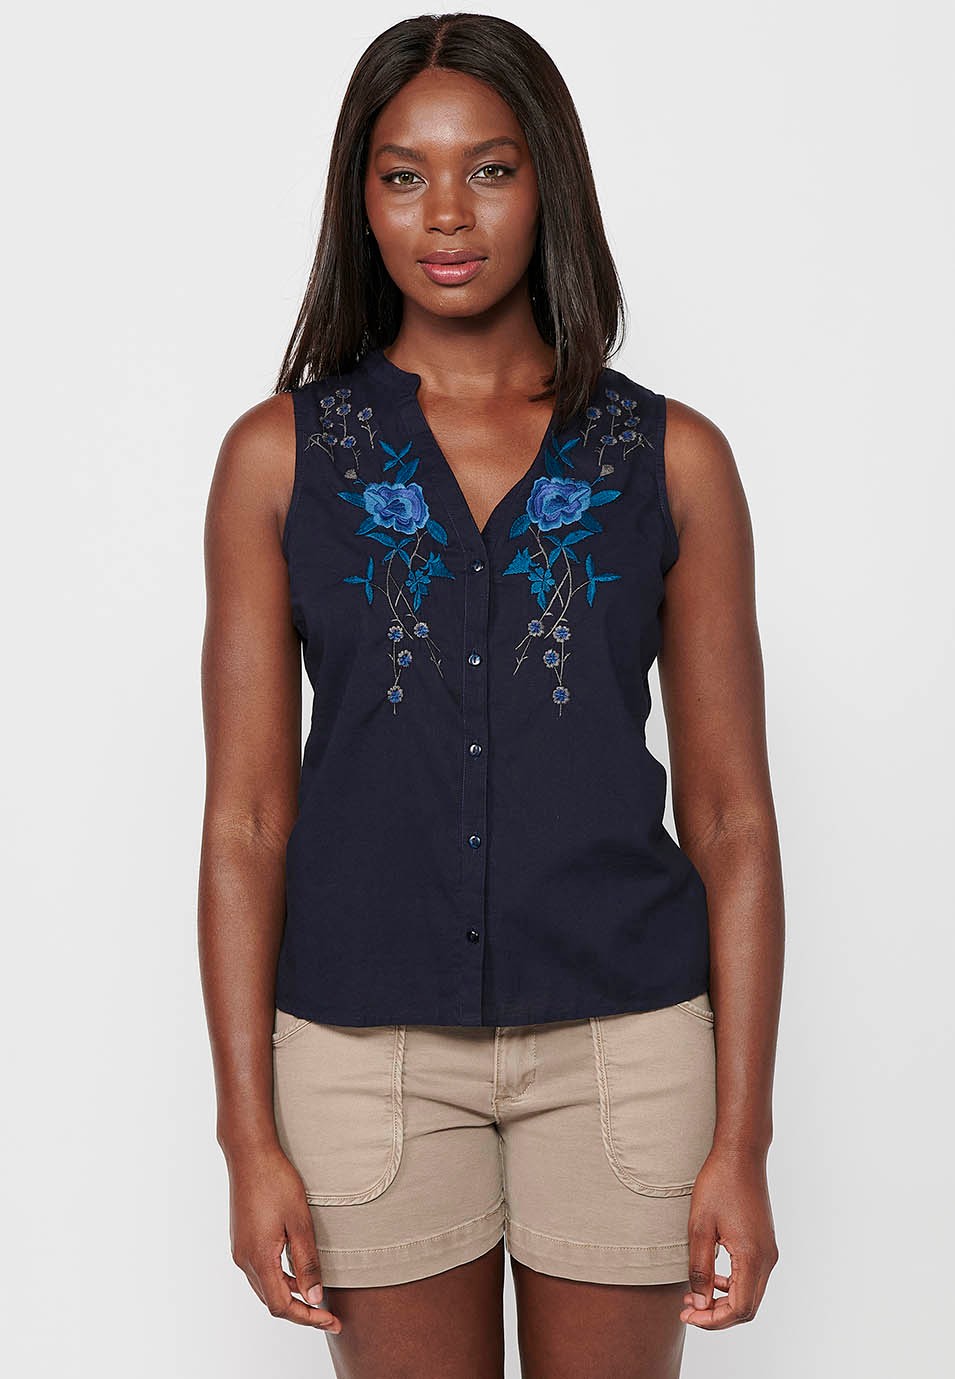 V-neck sleeveless blouse with front button closure and front floral embroidery in Navy for Women 3